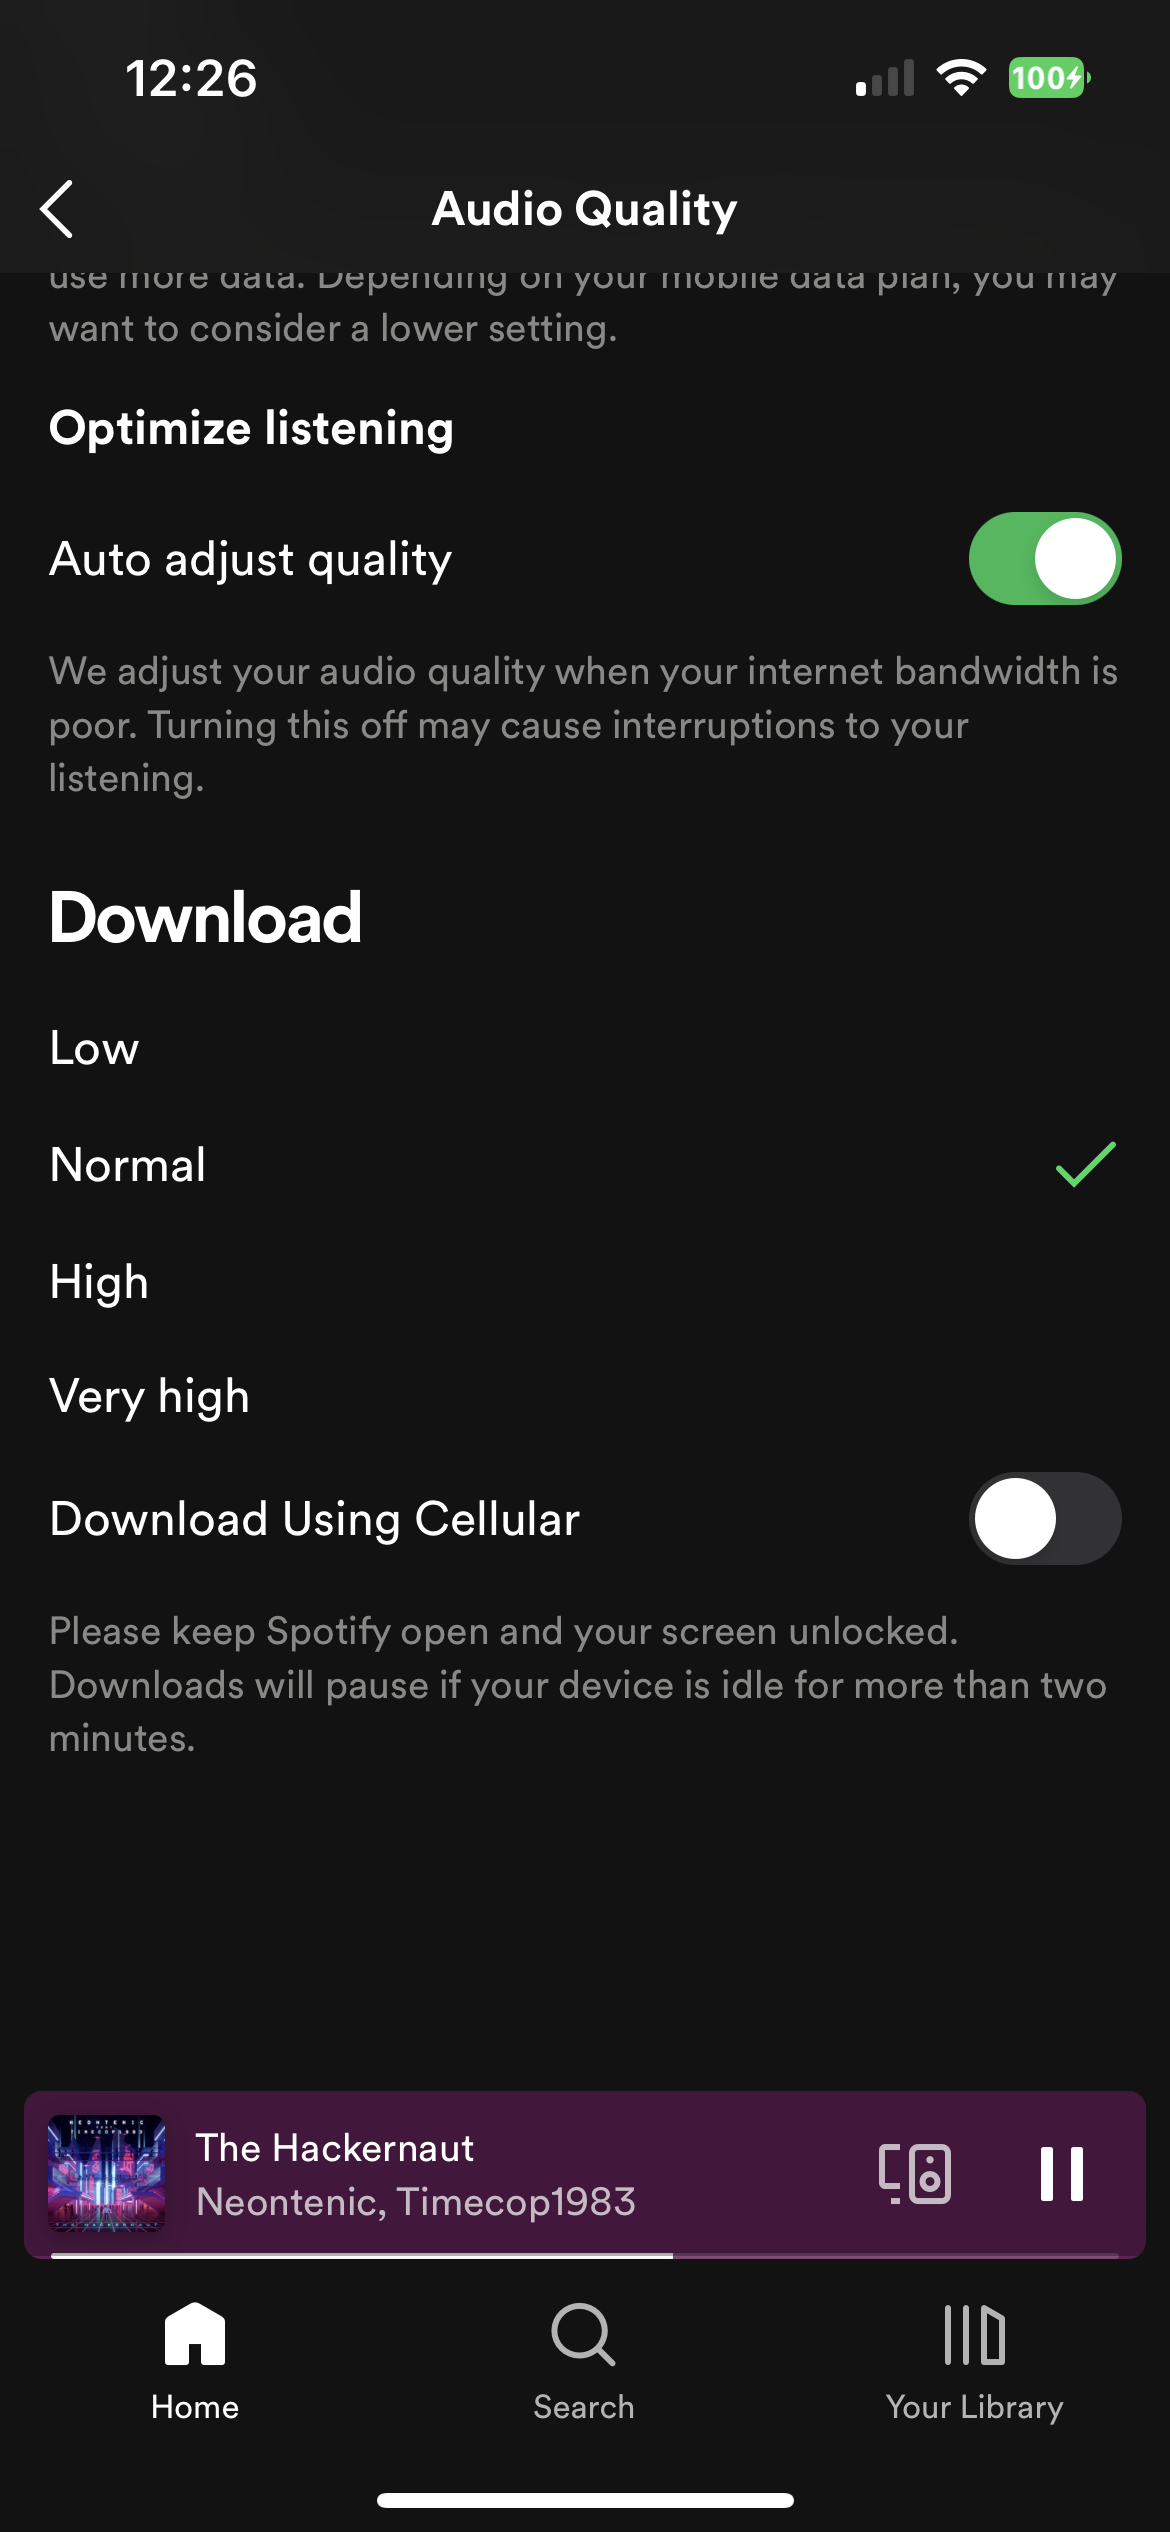 Audio Quality settings in the Spotify iPhone app